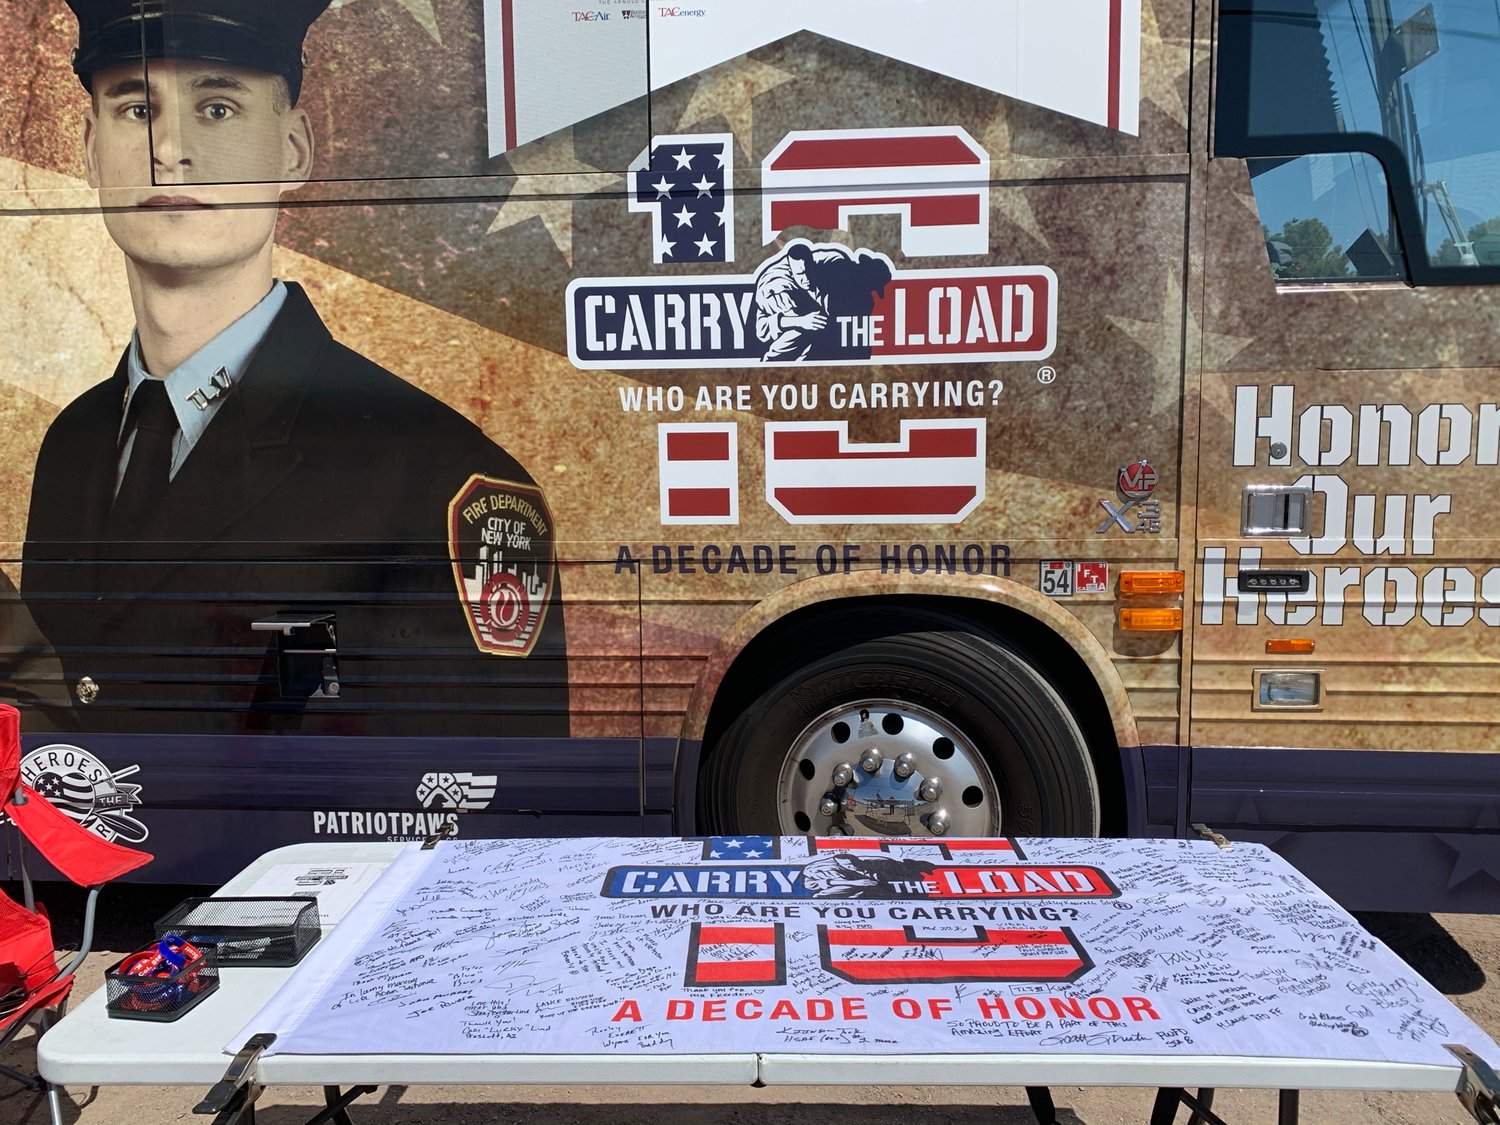 At an information station, a flag to be carried on the relay and the Carry the Load bus display the intent of the relay project to honor veterans and first responders who have lost their lives.